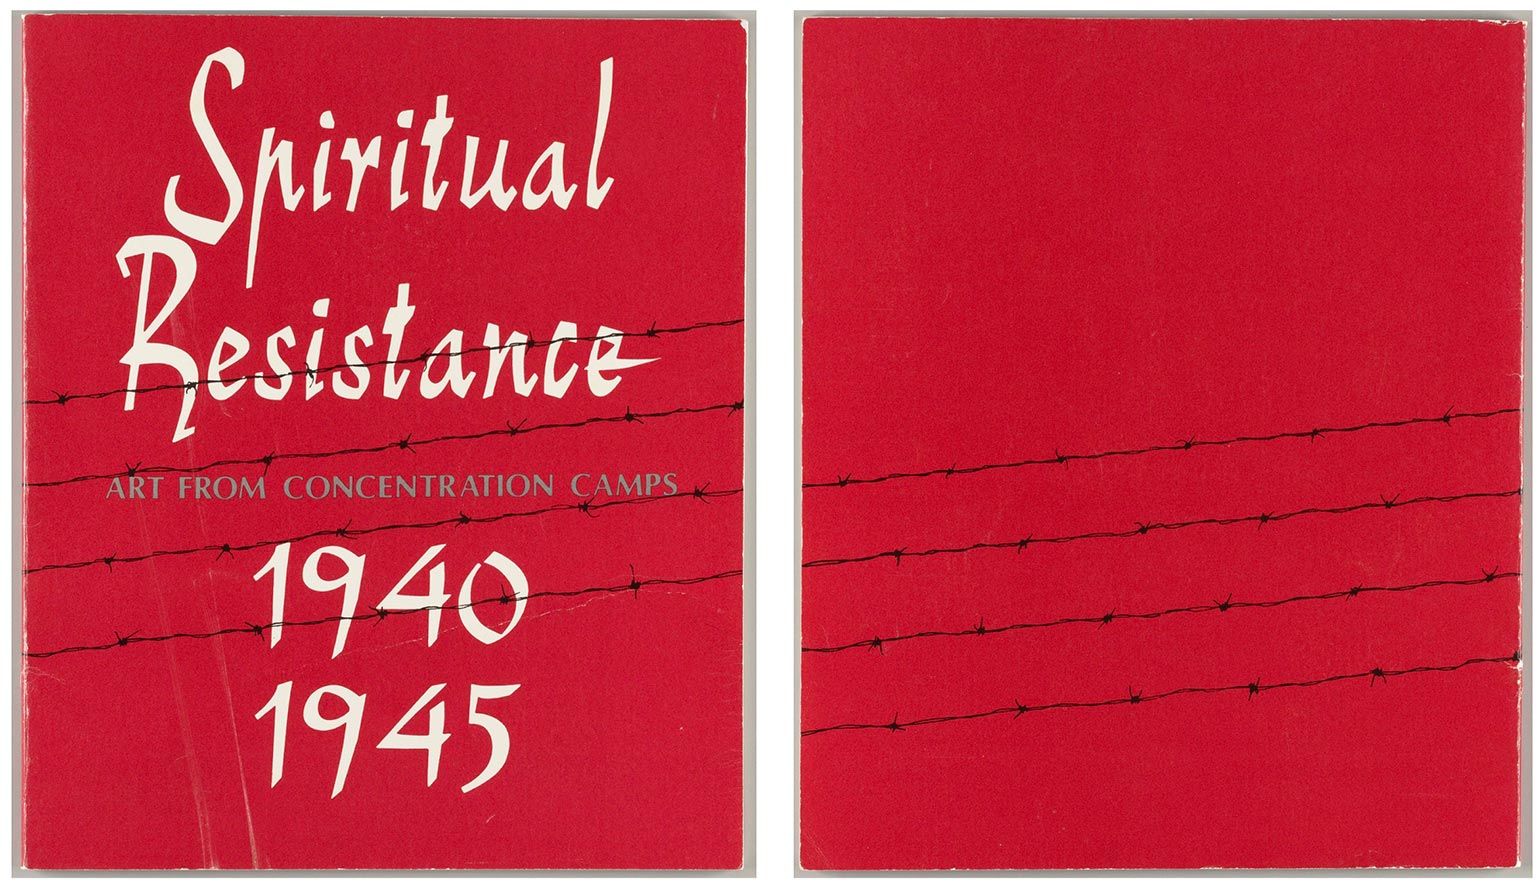 Bright red cover with illustration of barbed wire